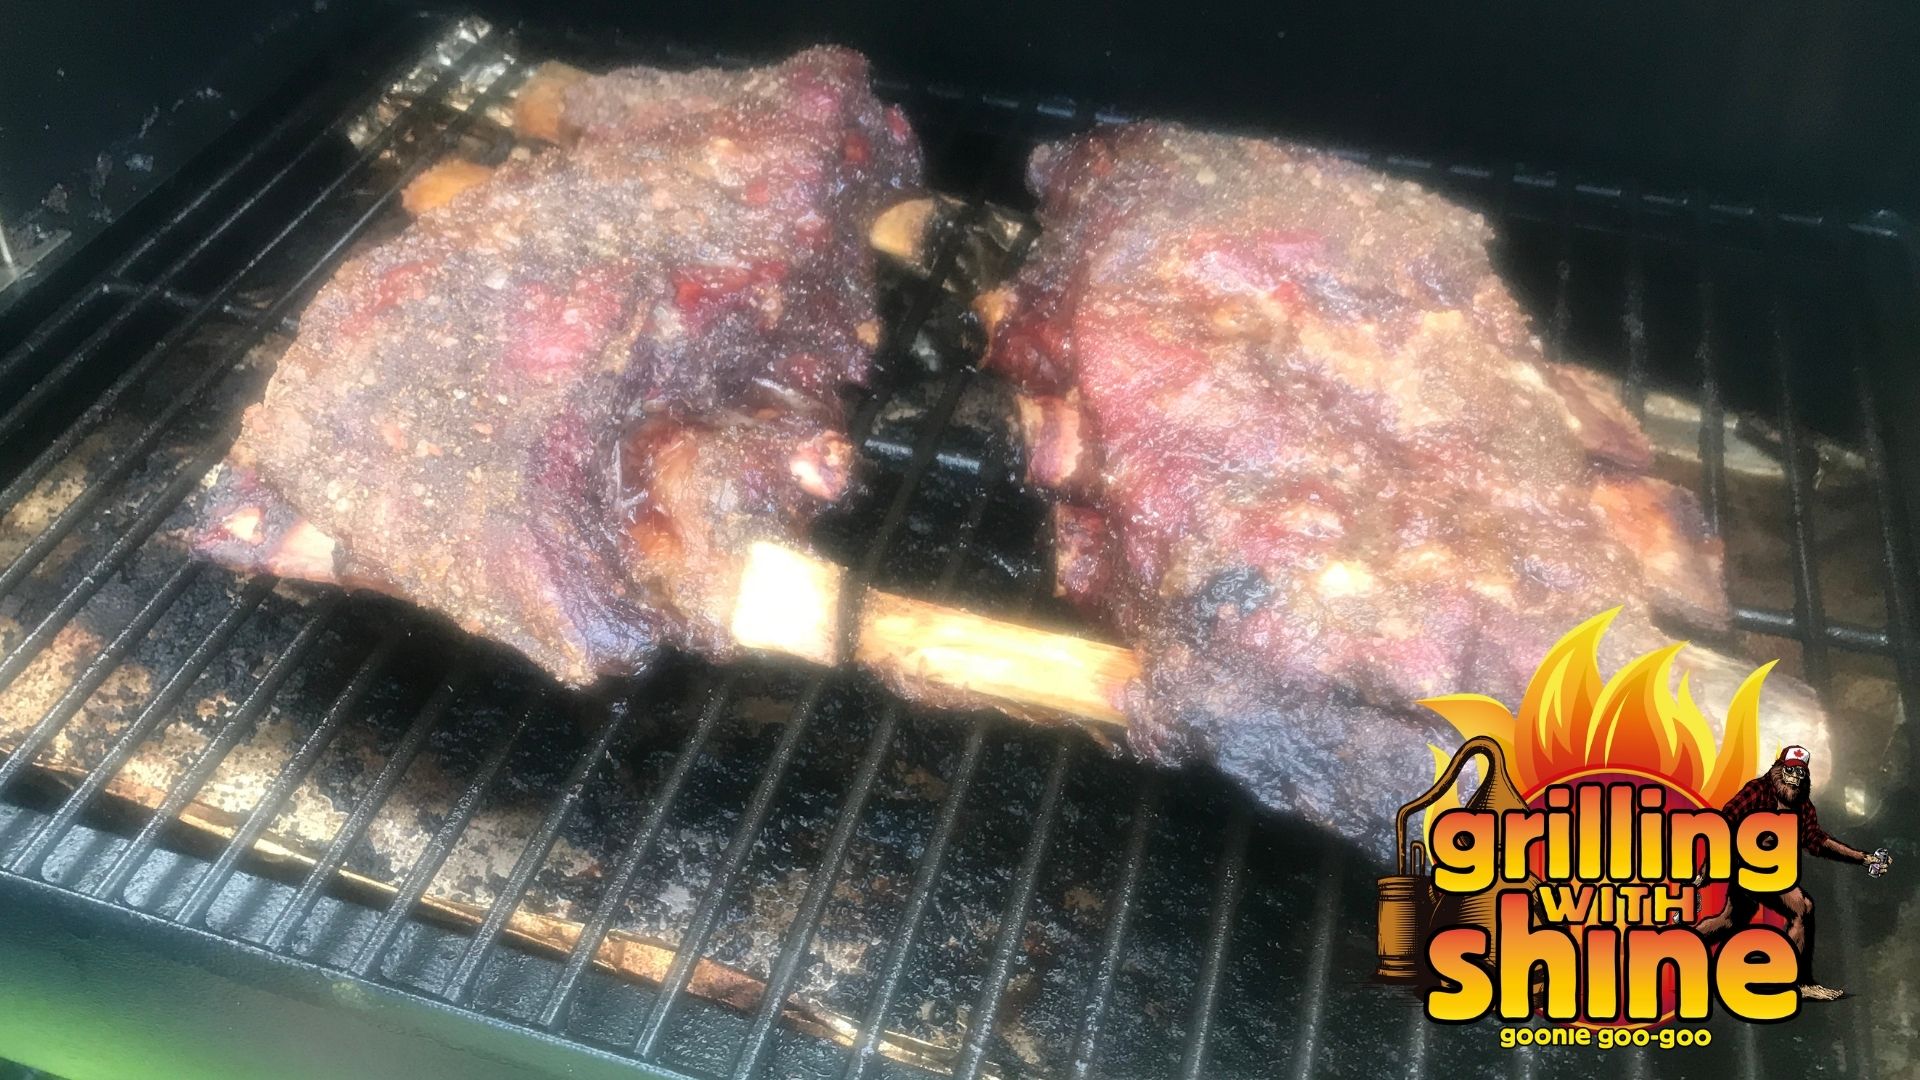 grilling beef ribs